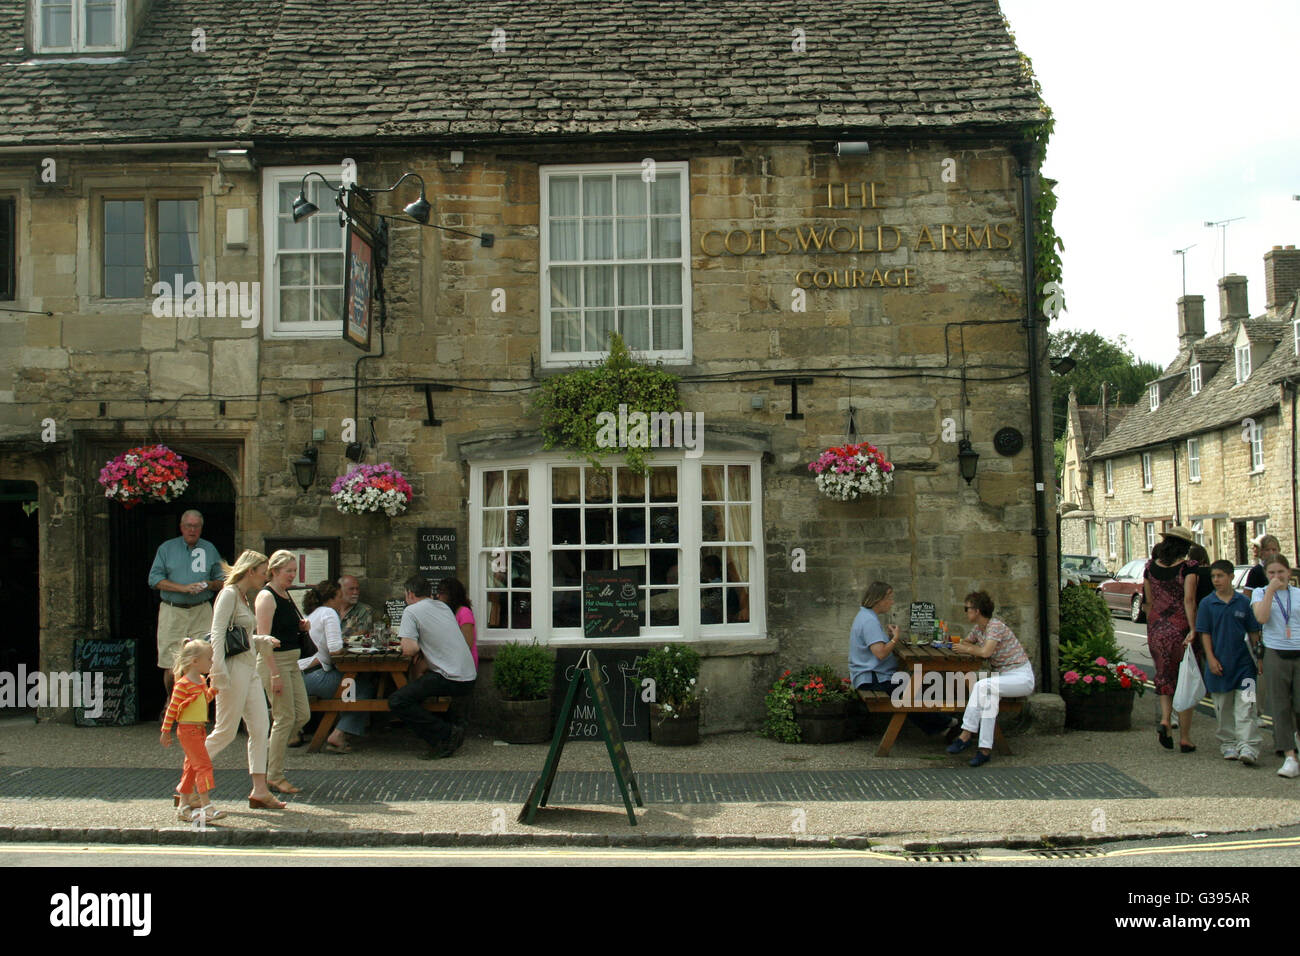 Cotswolds. The Cotswold Arms pub in full swing on 11th Century Burford's High Street with outdoor tables and passers-by. Stock Photo